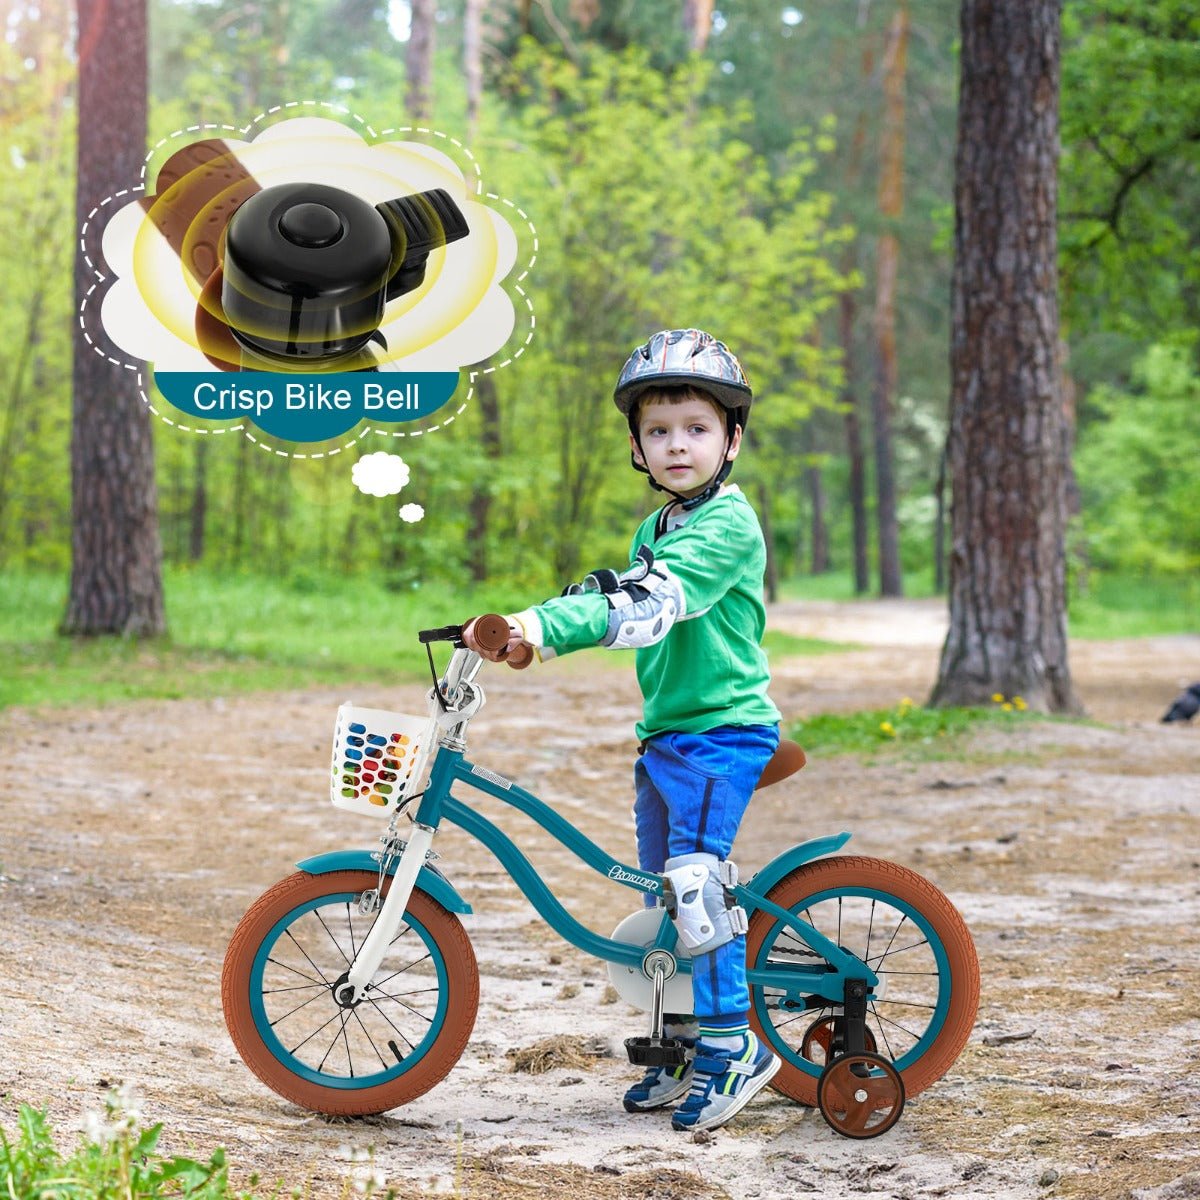 Turquoise Green Kid's Bike - Safety and Style Combined